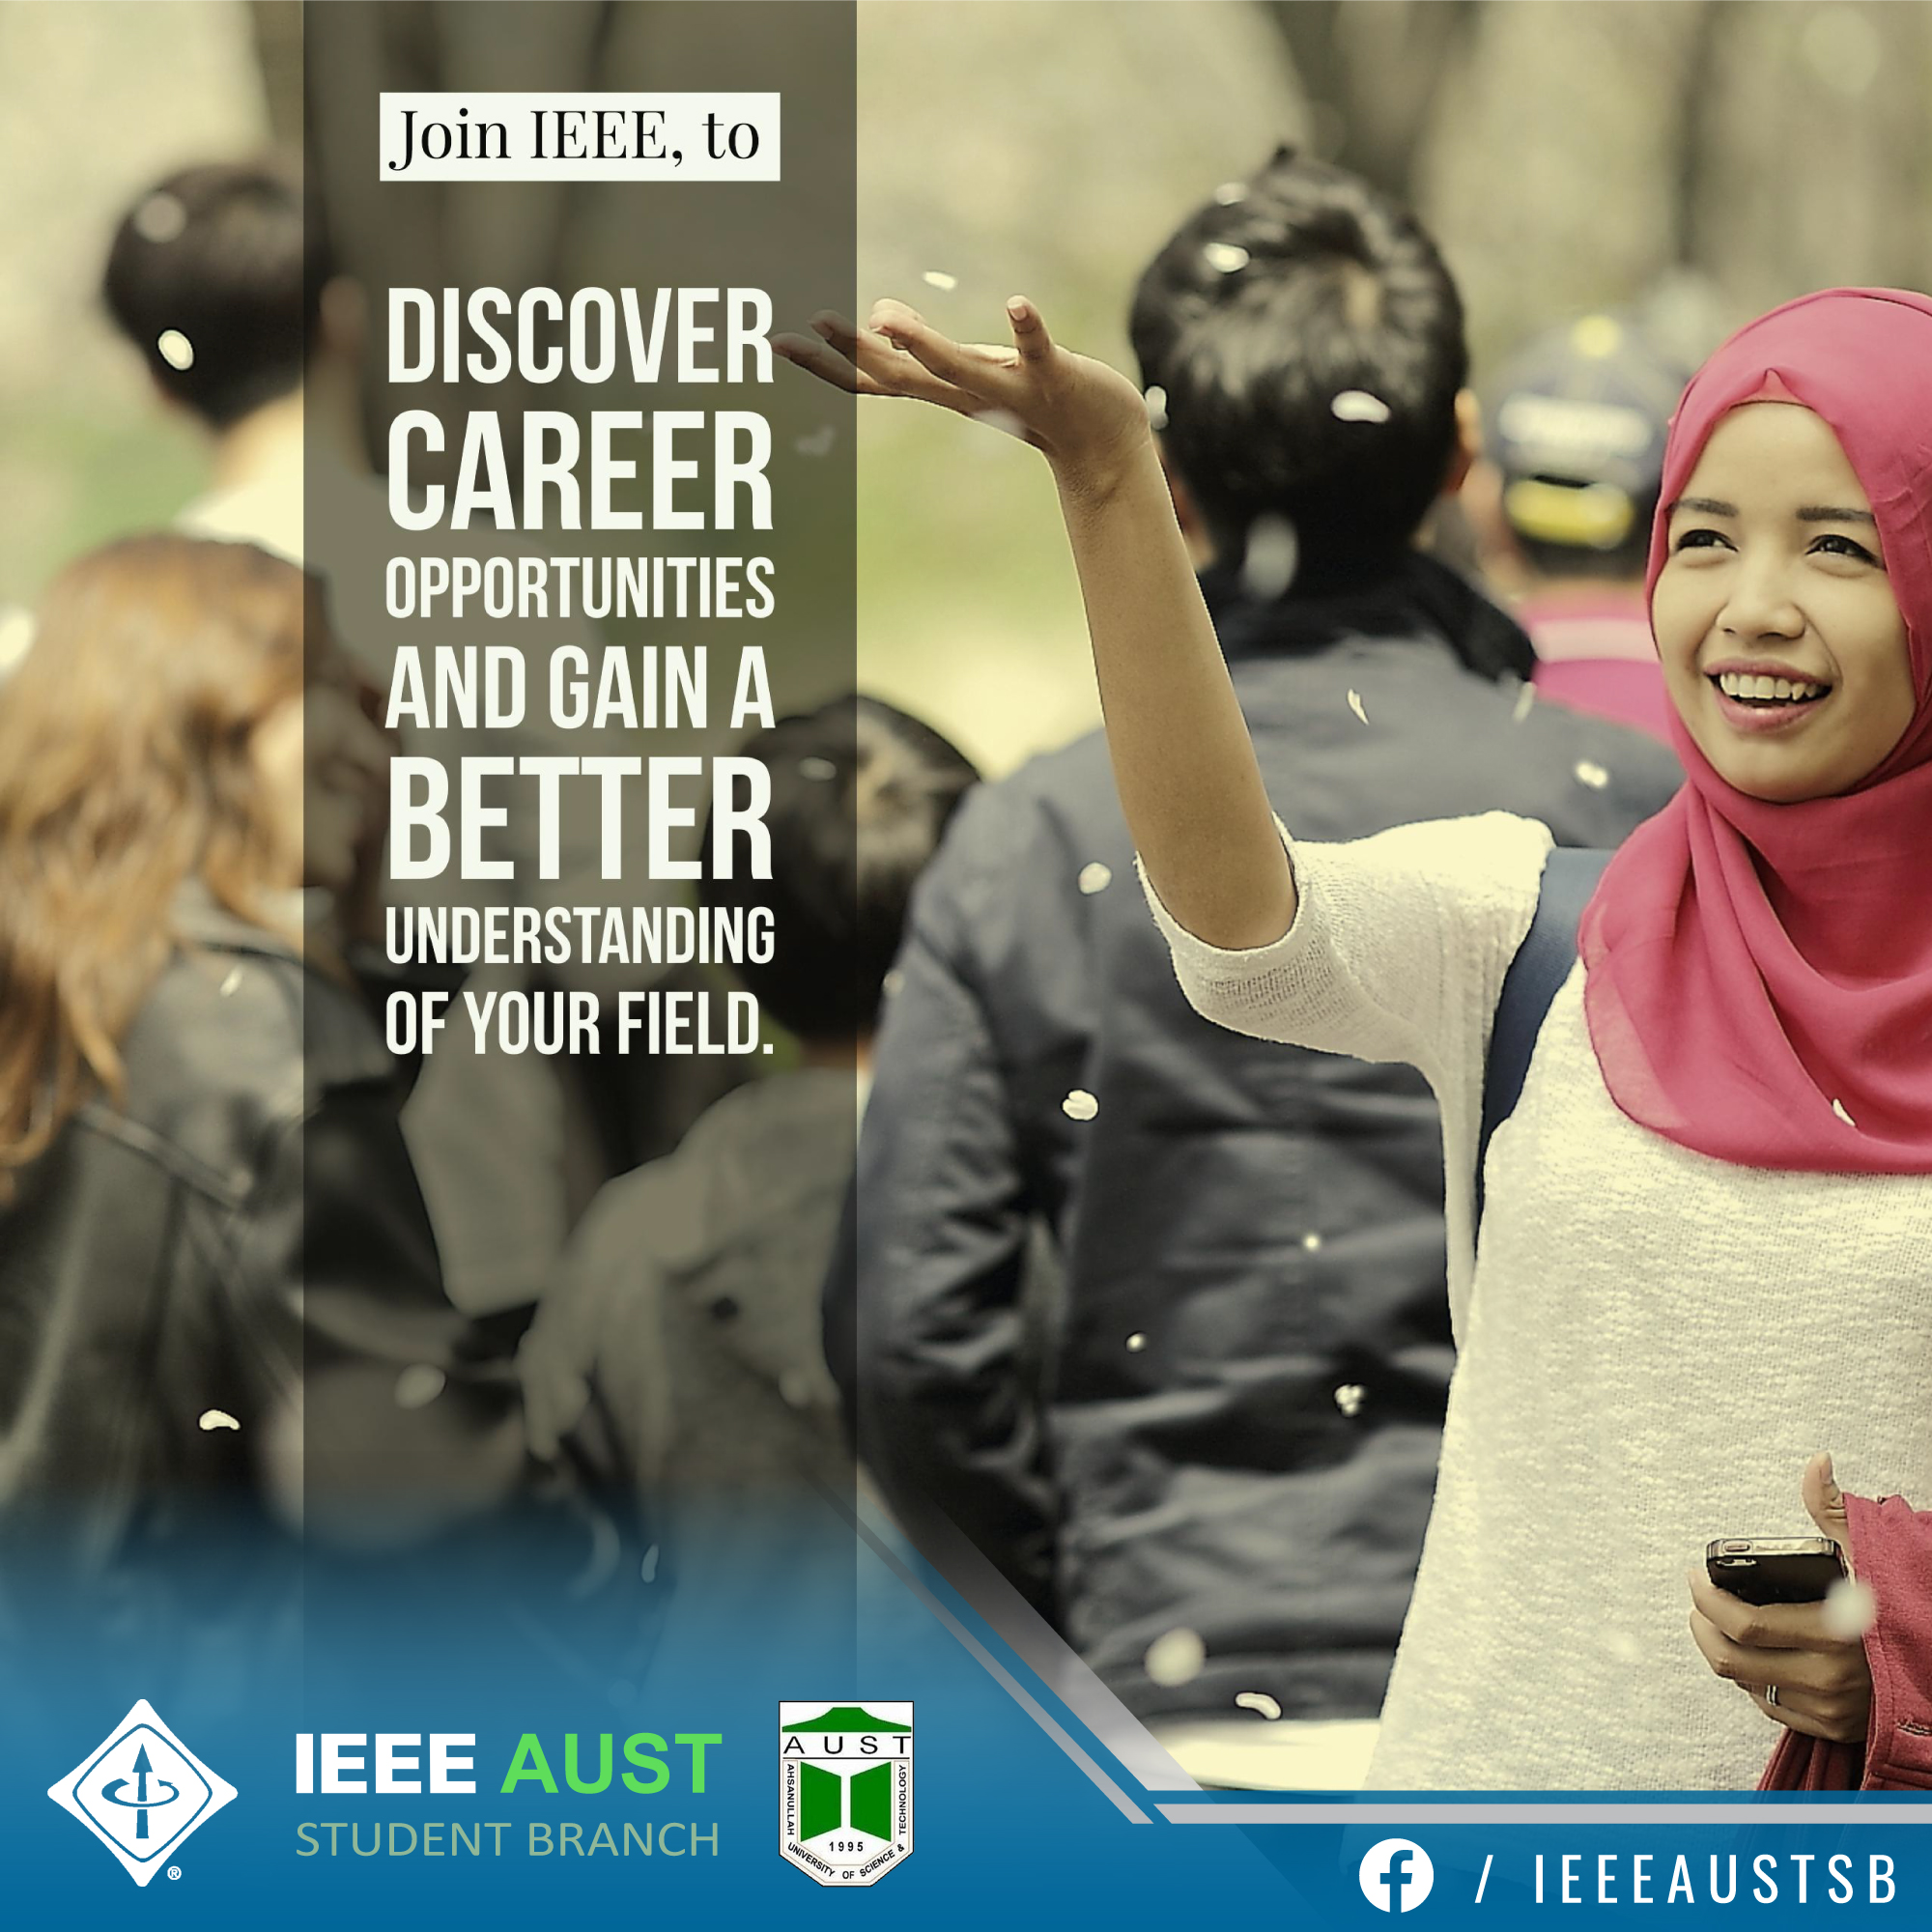 Join IEEE to discover career opportunities and gain a better understanding of your field.